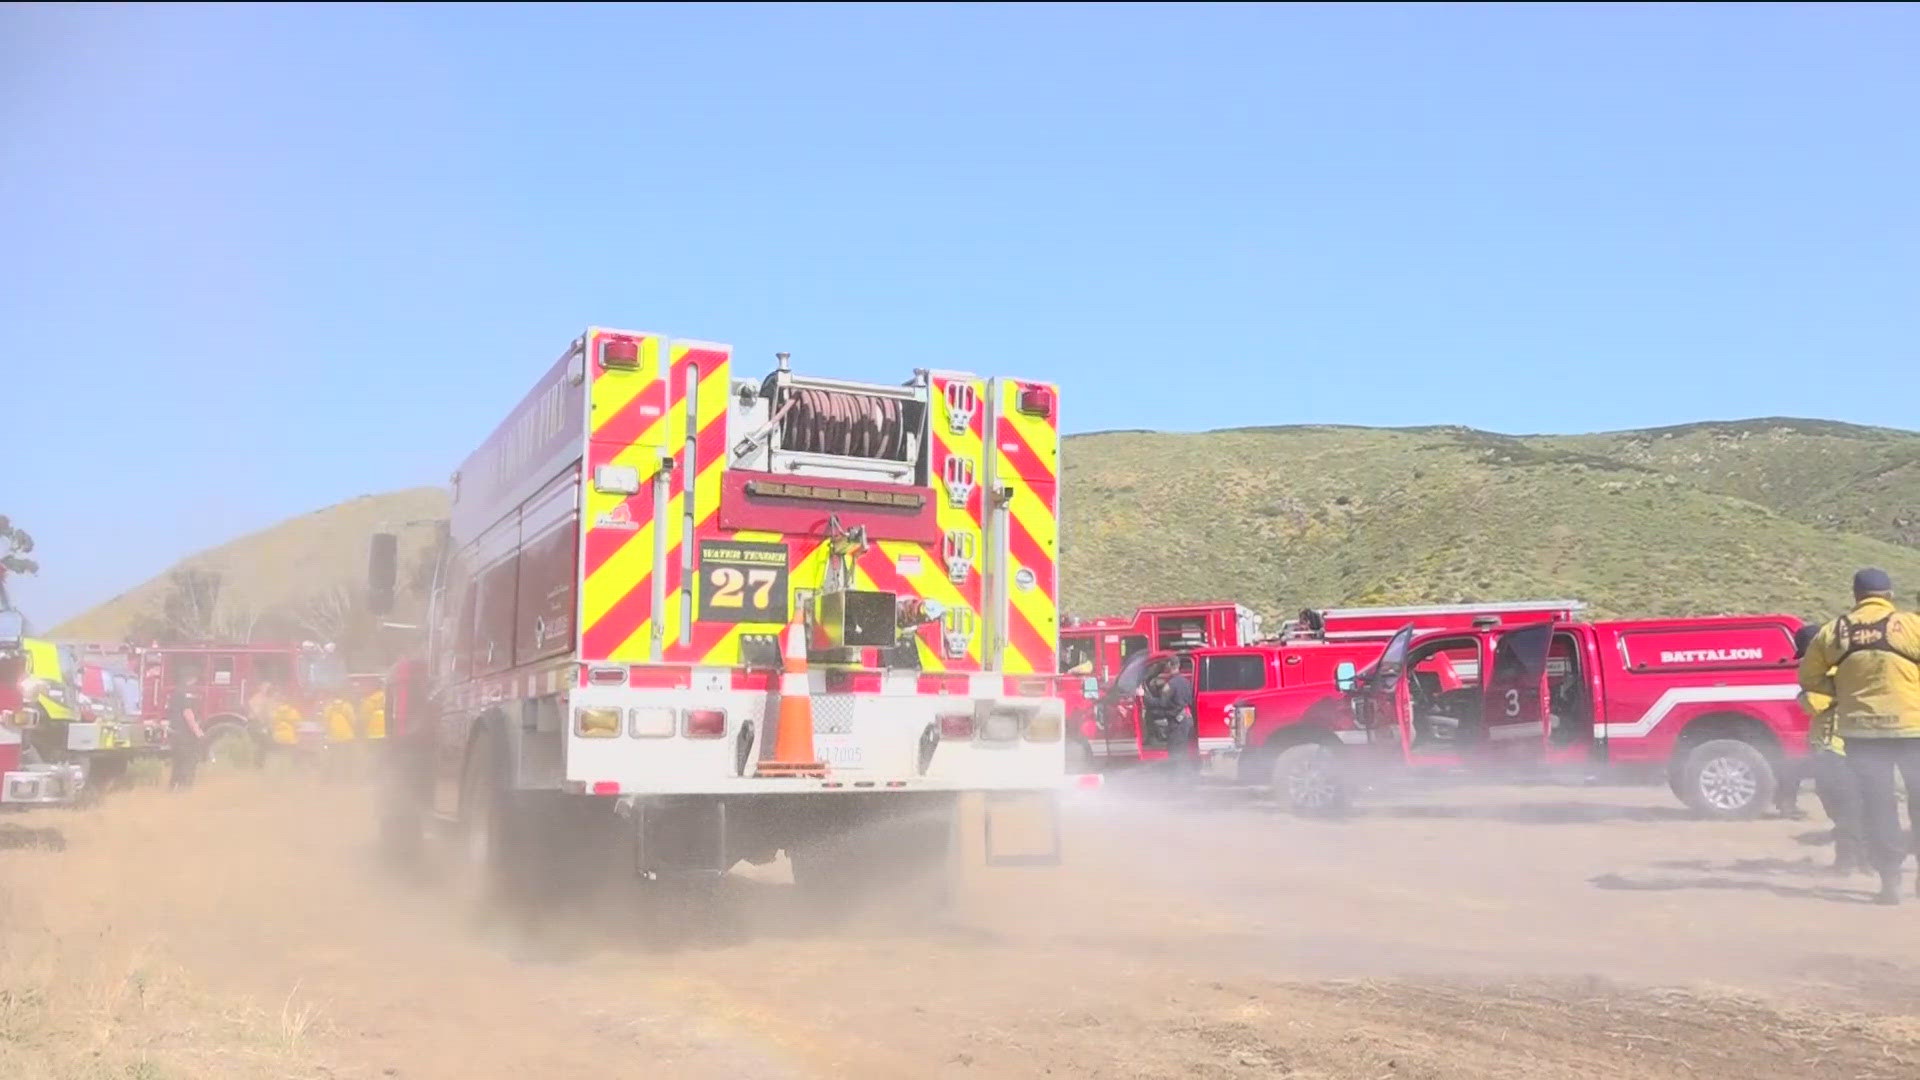 More 750 firefighters from around San Diego were part of a massive wildfire training exercise.